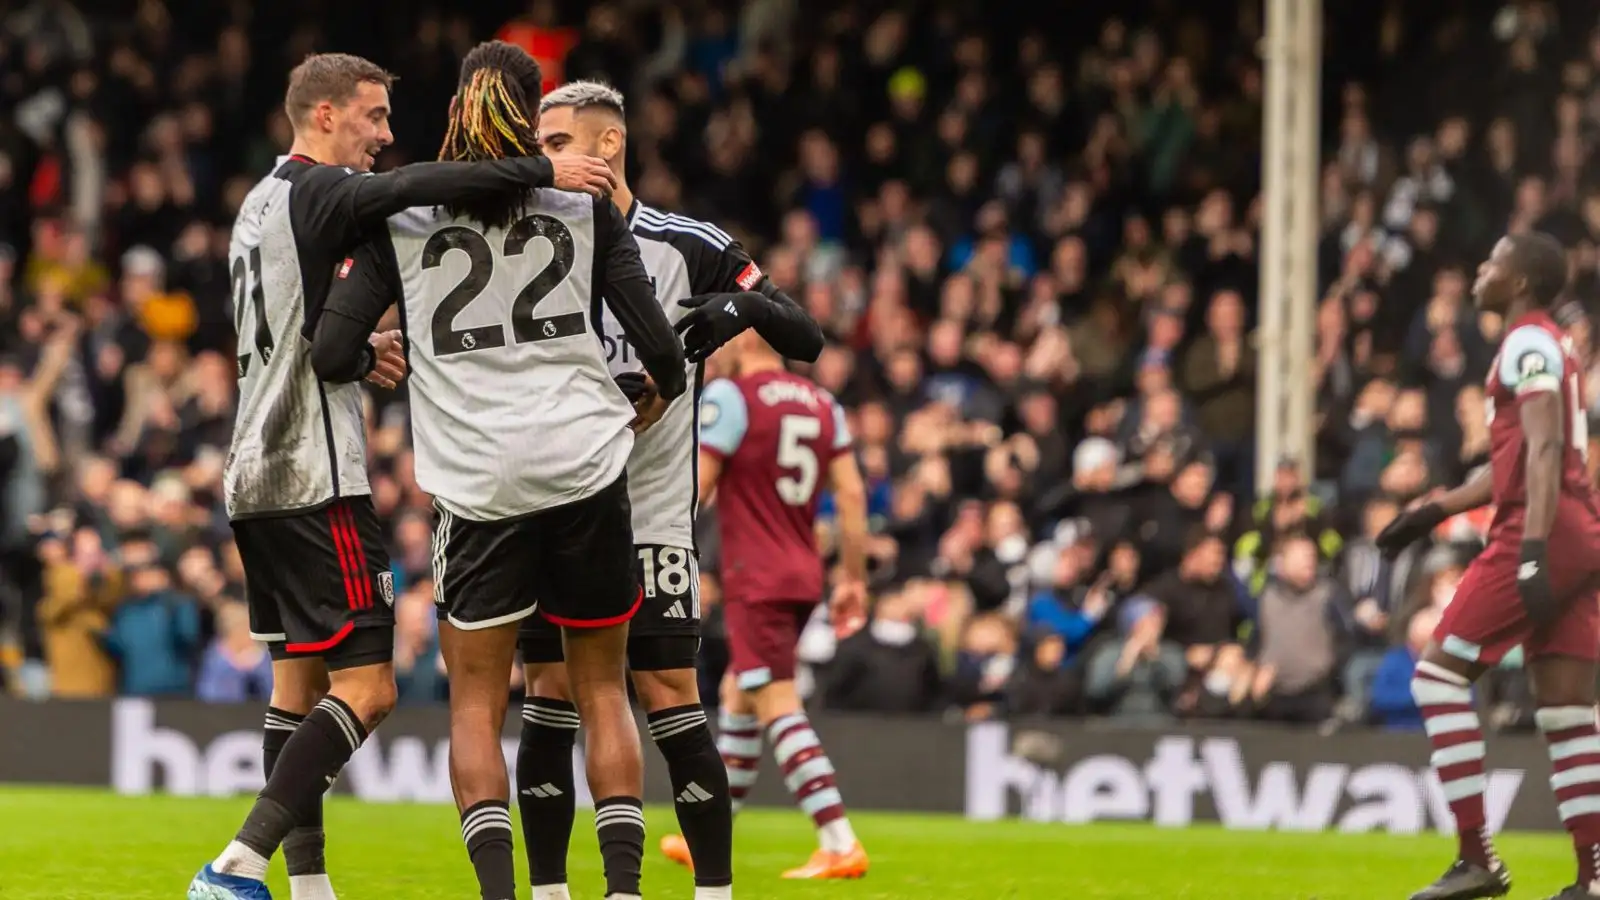 Fulham 5 0 West Ham Cottagers Make It 16 Goals In Four Games With Emphatic London Derby Win